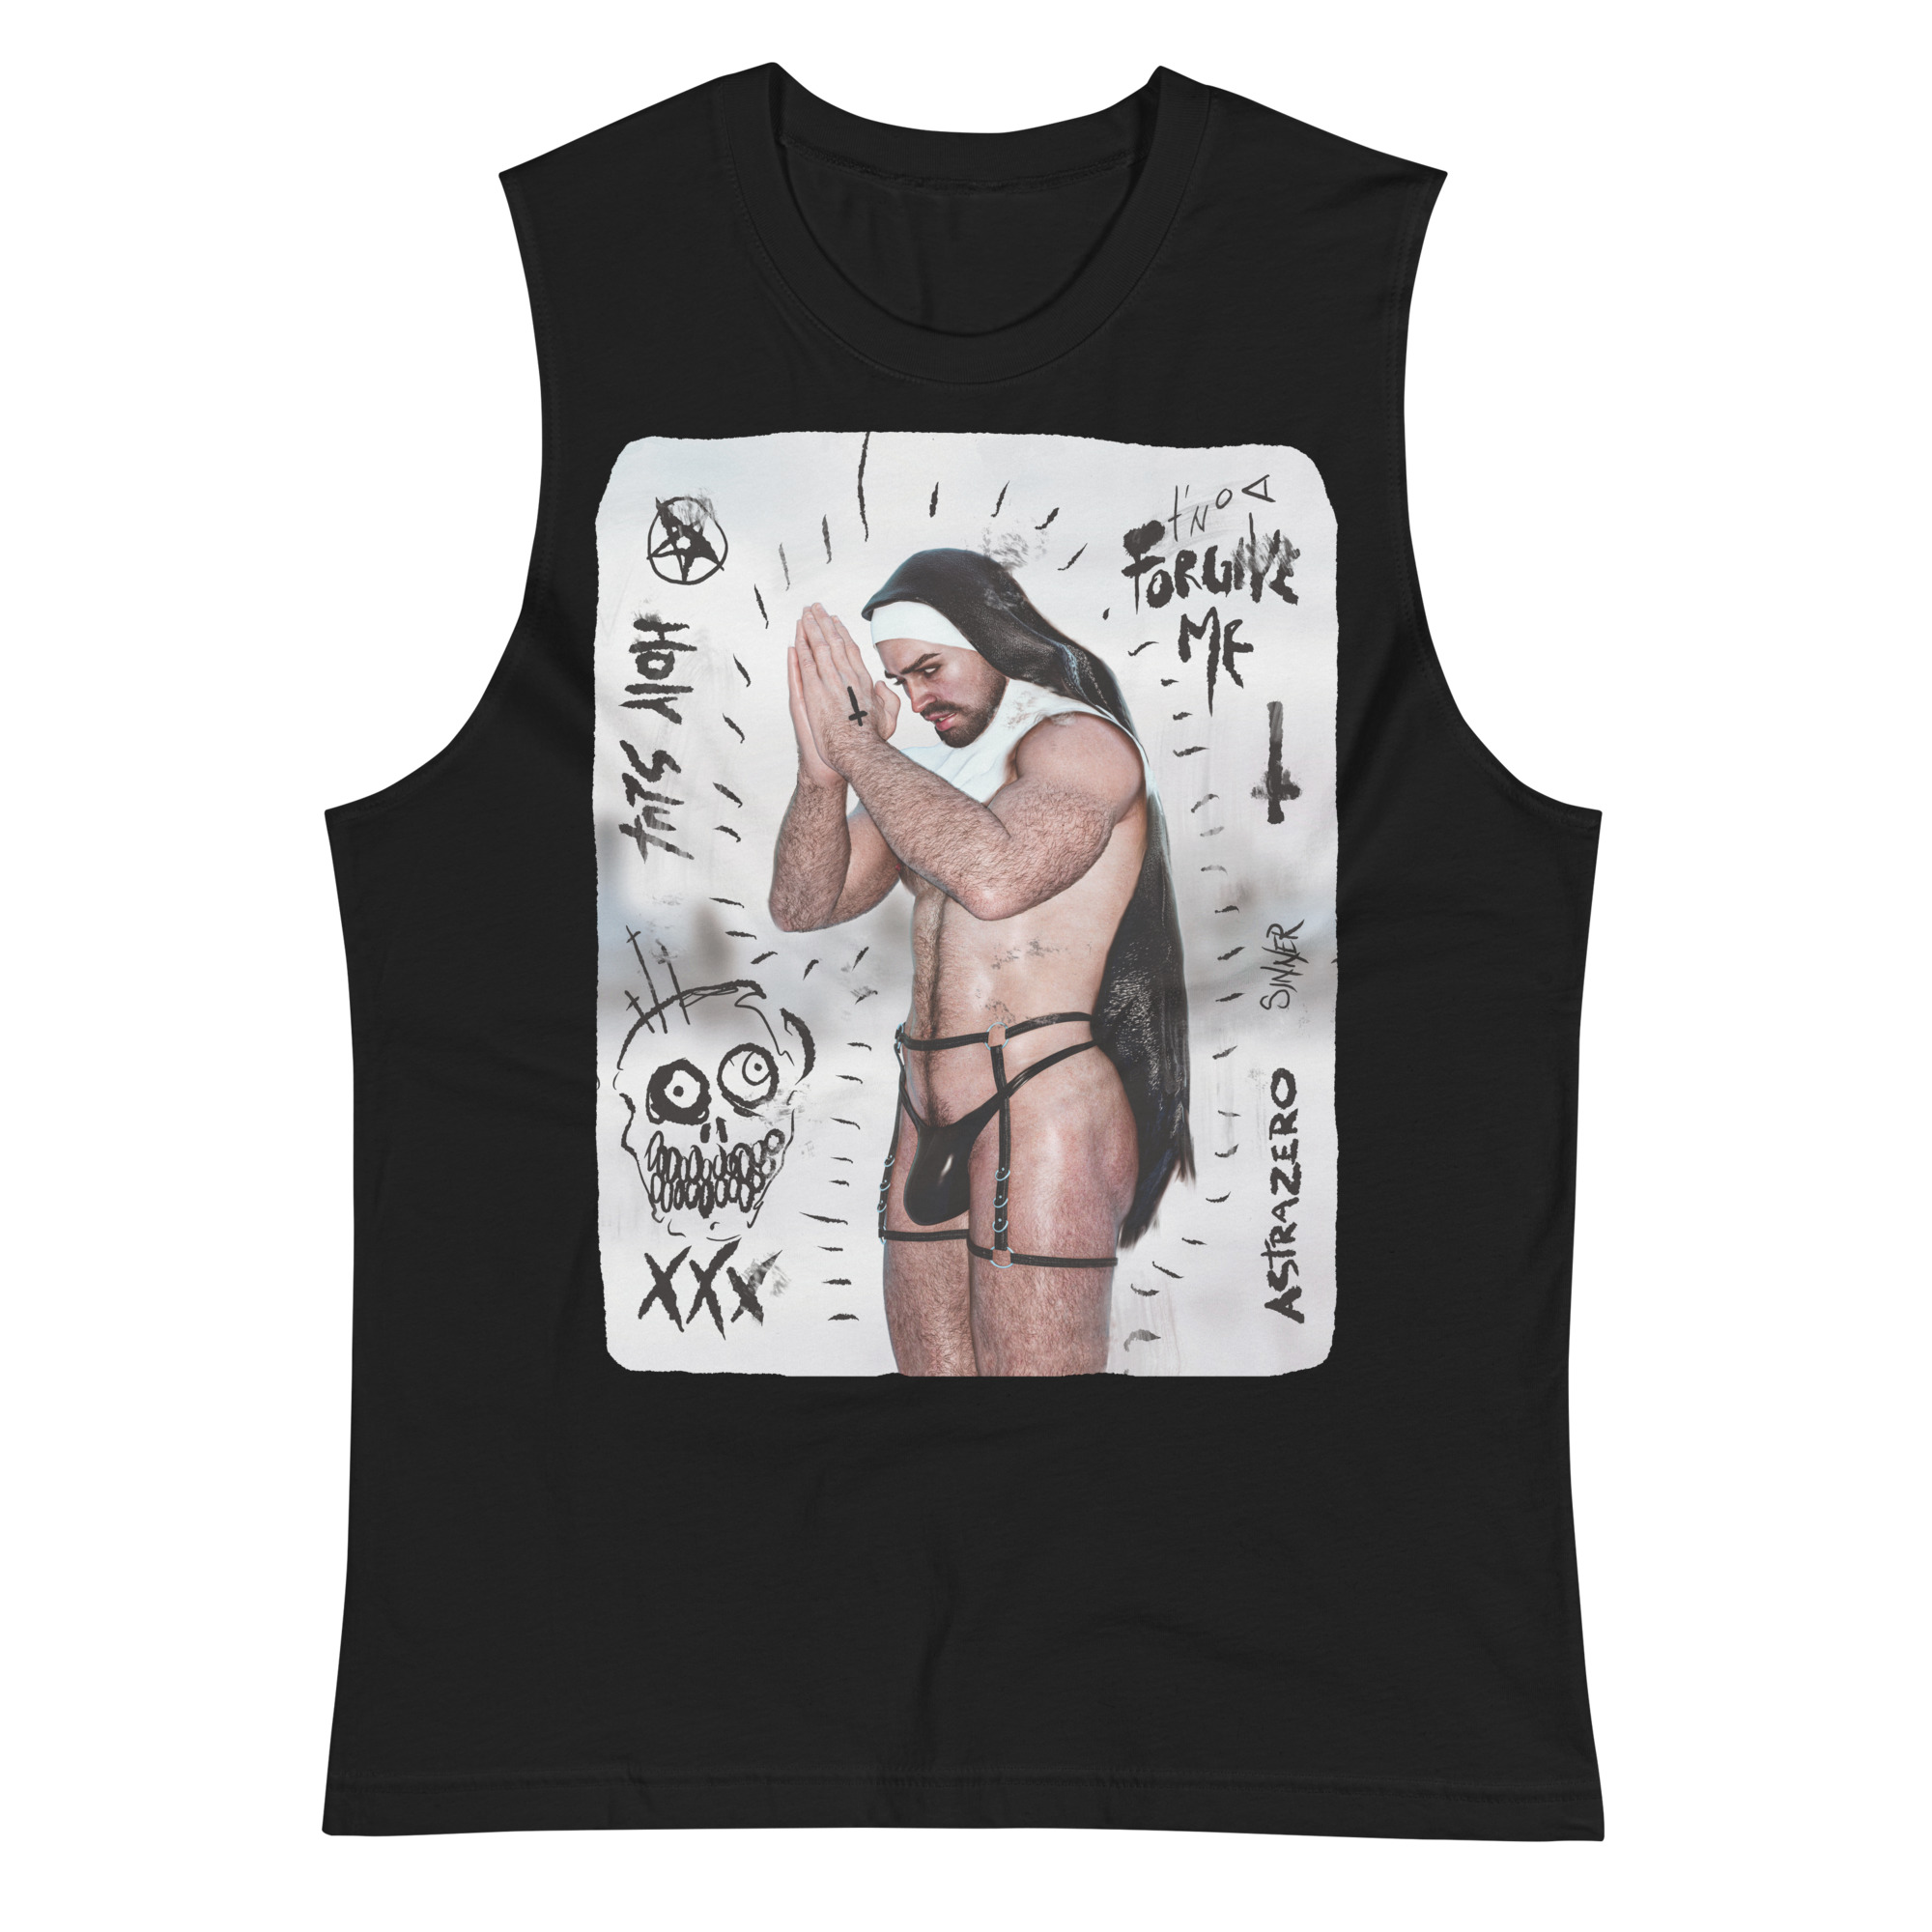 Featured image for “Holy Sl*t Nun - Muscle Shirt”